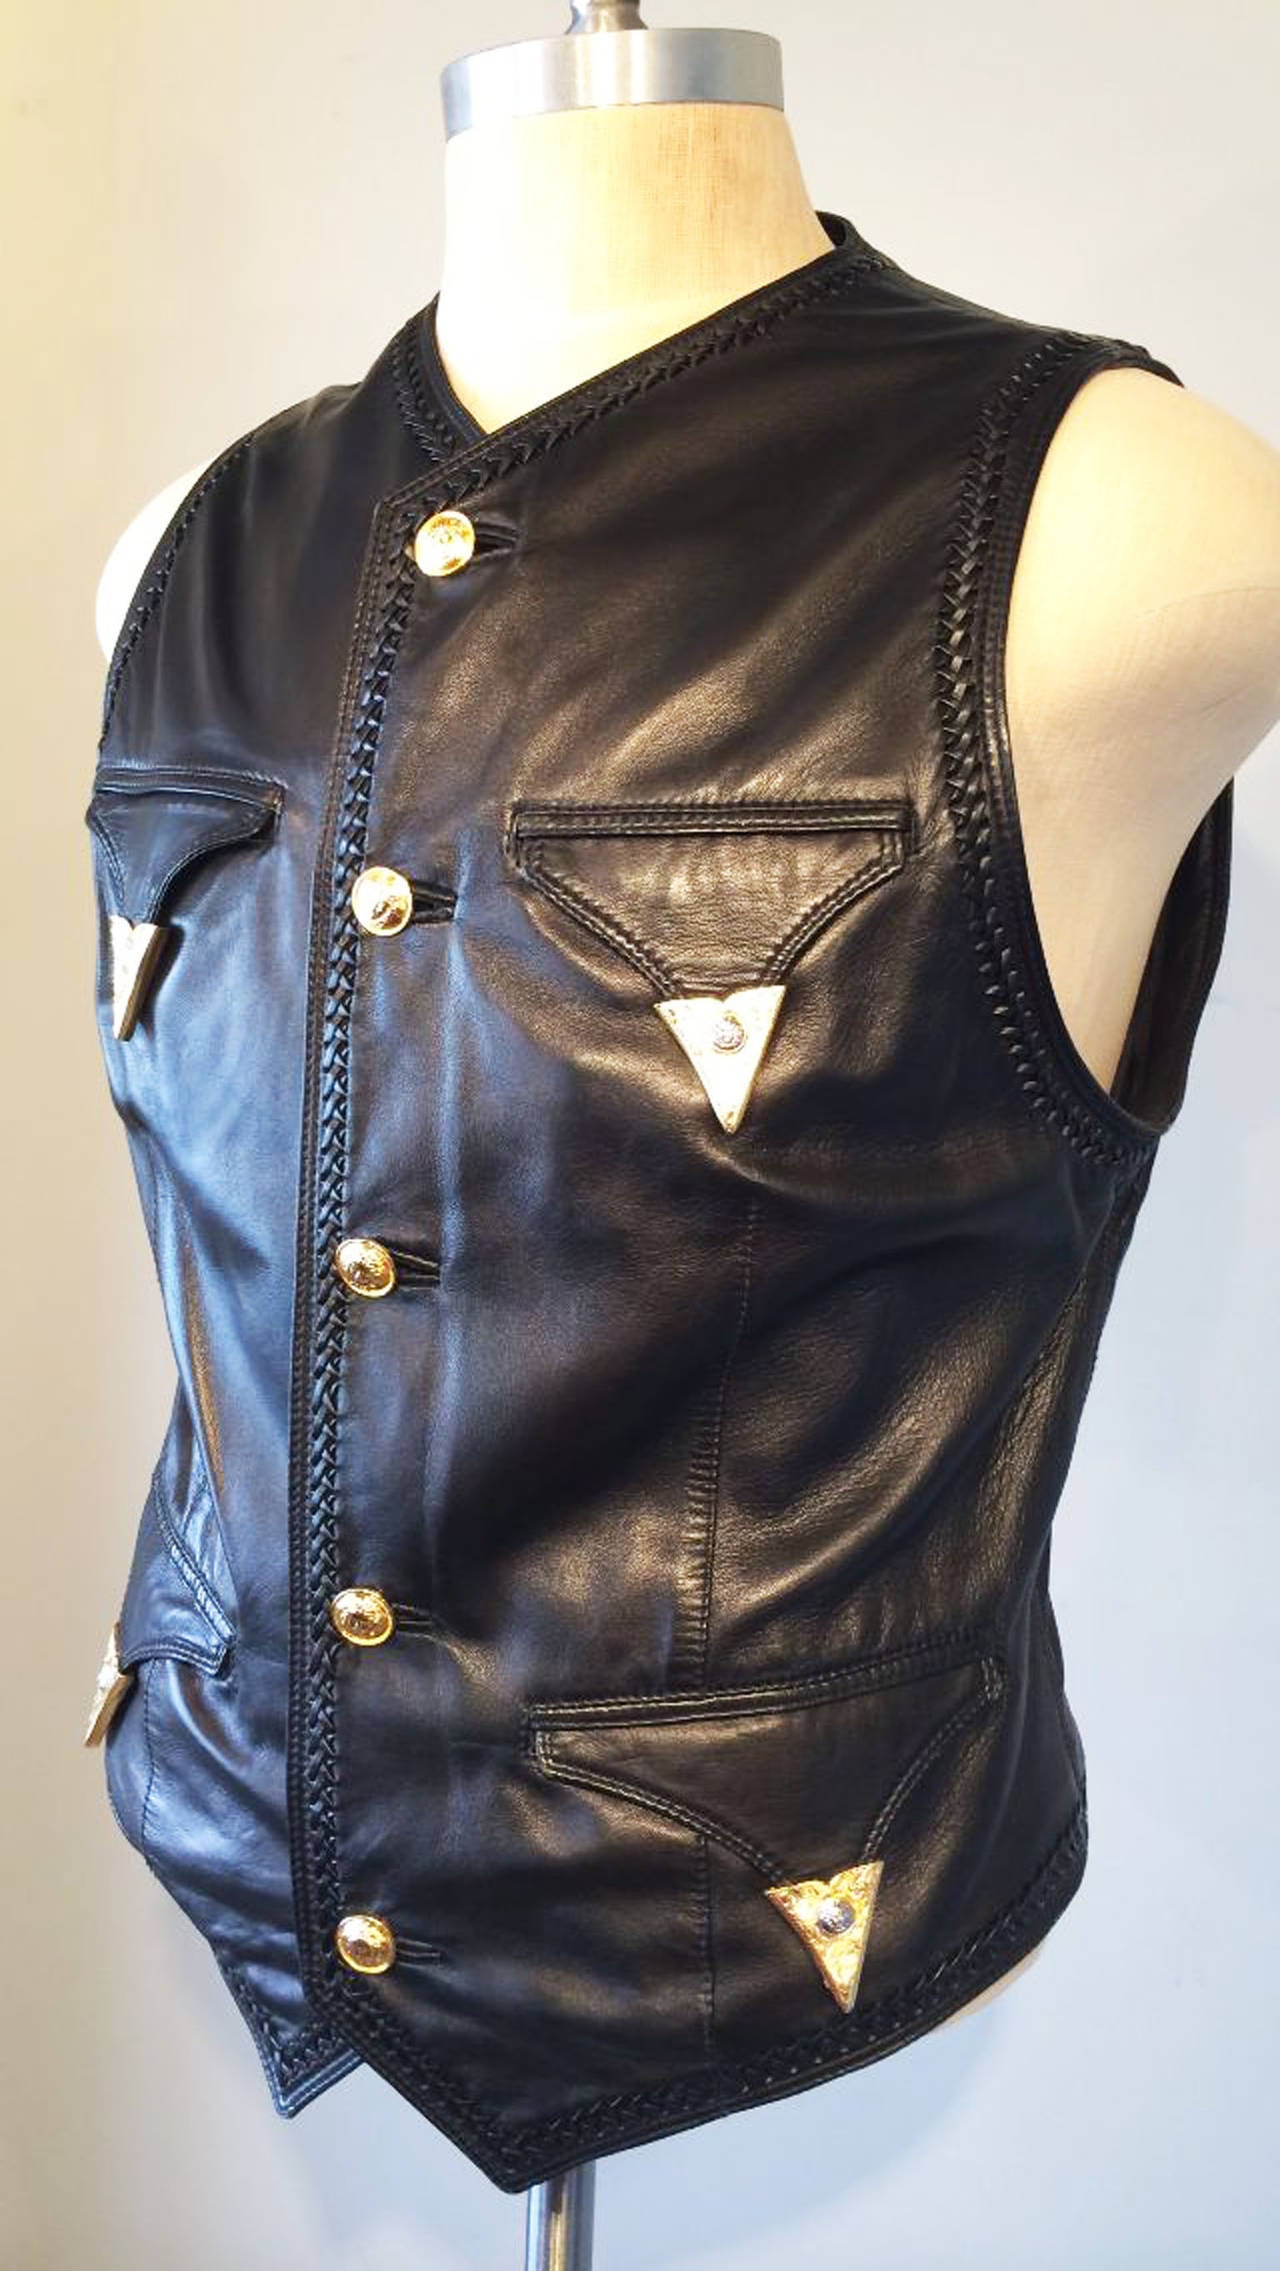 A fine and rare vintage Gianni Versace black leather 